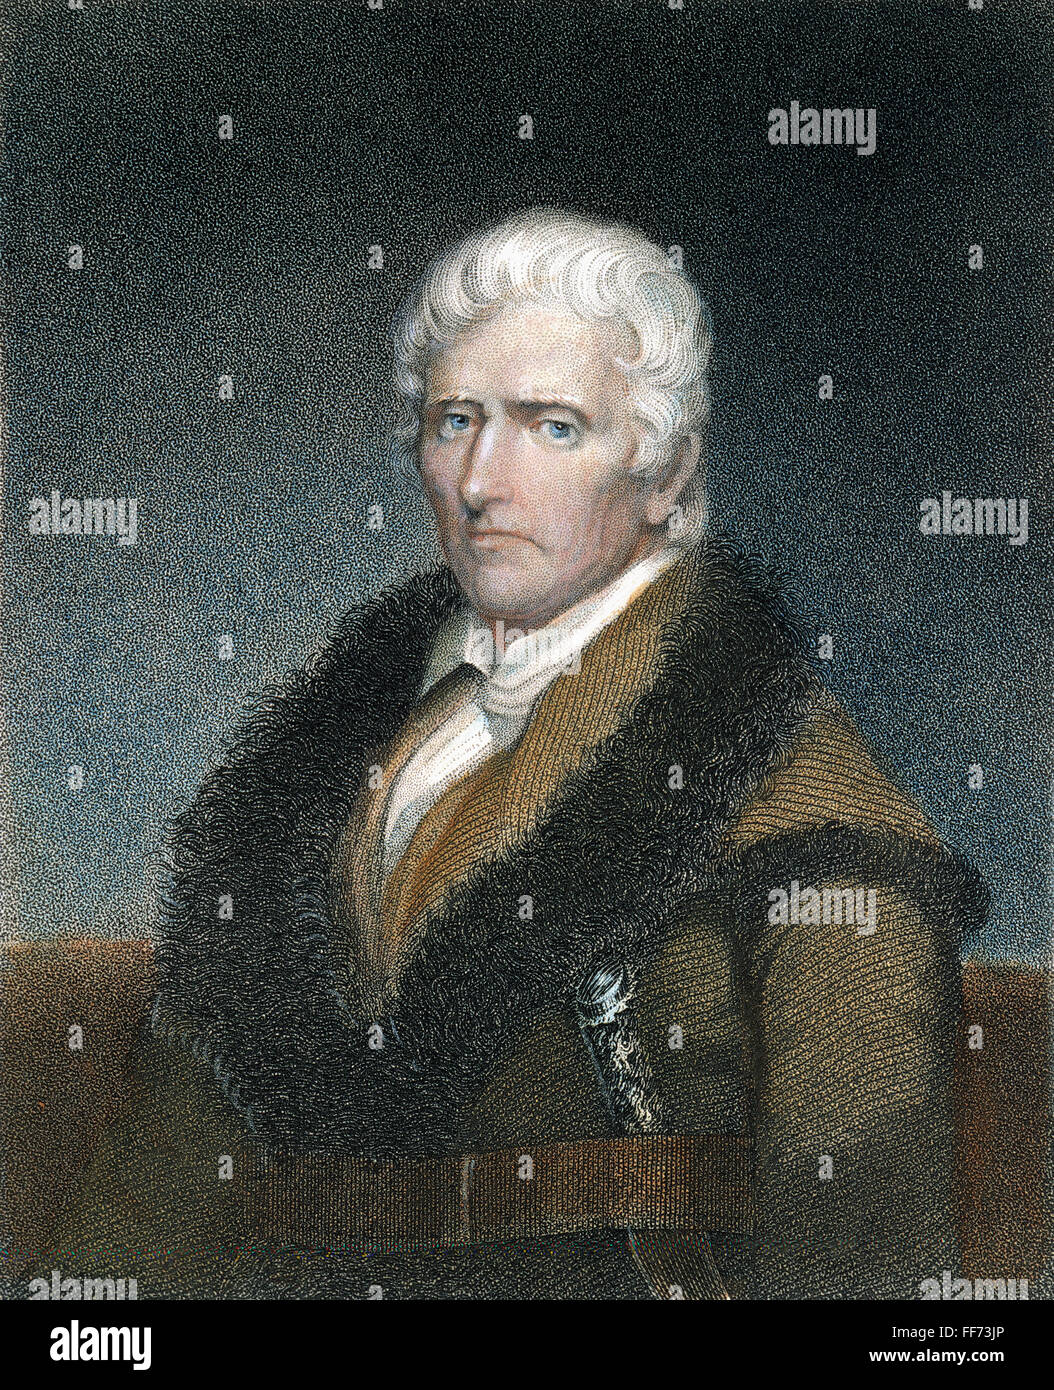 DANIEL BOONE (1734-1820). /nAmerican frontiersman. Stipple engraving, American, c1835, after Chester Harding. Stock Photo